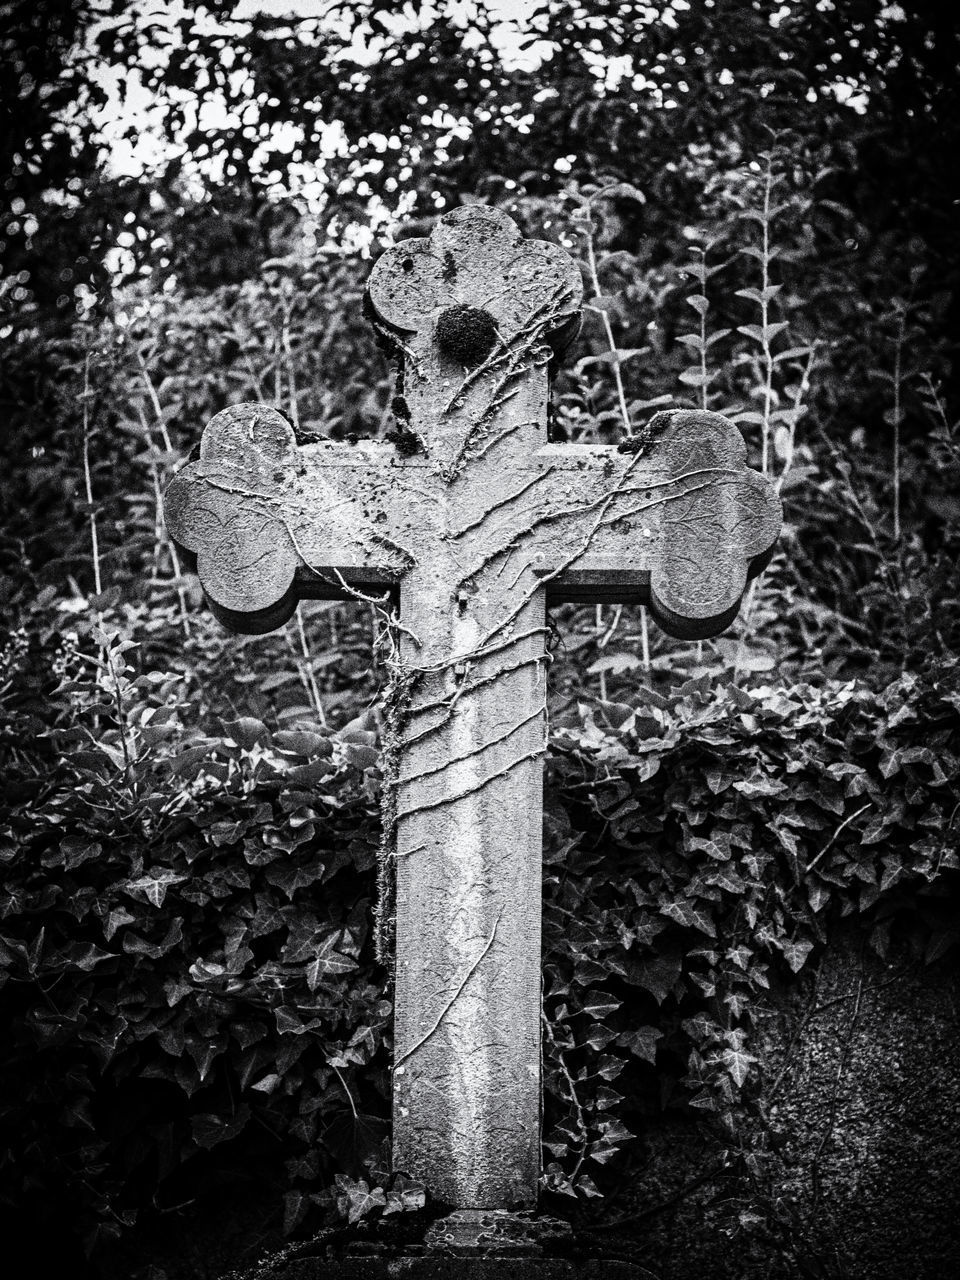 CLOSE-UP OF CROSS SCULPTURE IN CEMETERY